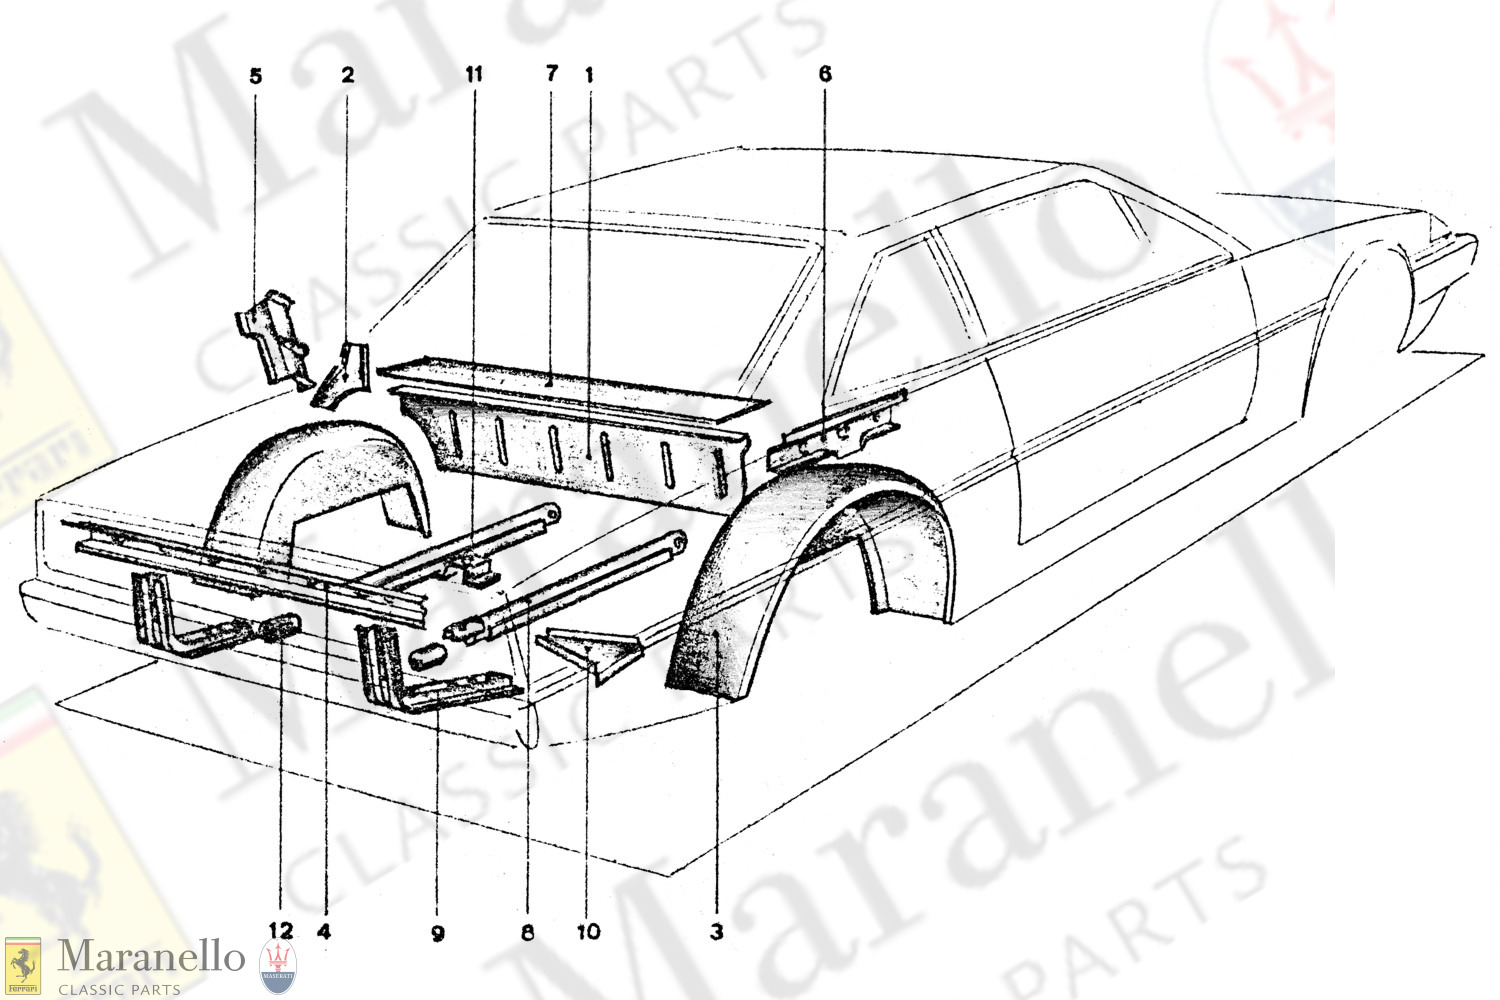 202 - Rear Frame Components